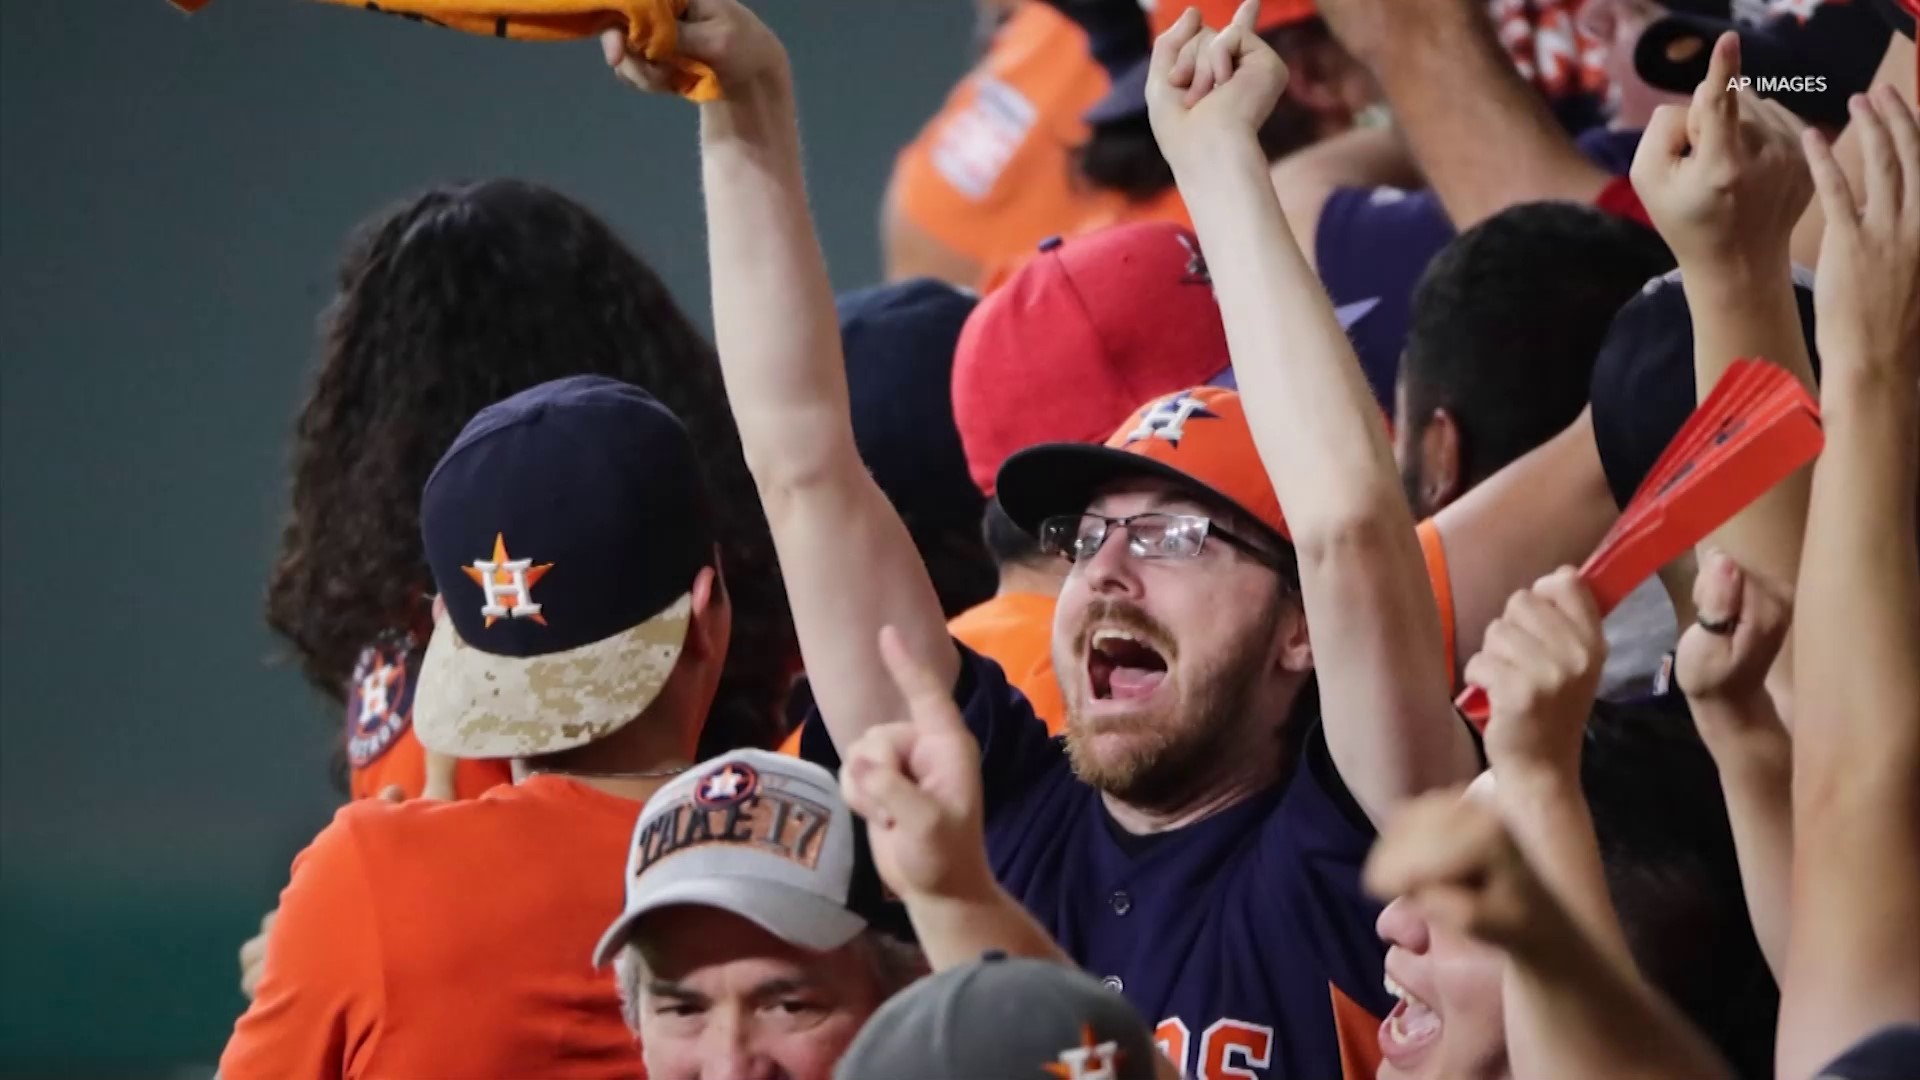 KHOU 11 looks back at the Astros’ 2017, 2018, 2019, 2020 and 2021 postseason runs through the lens of Houston’s biggest fans.